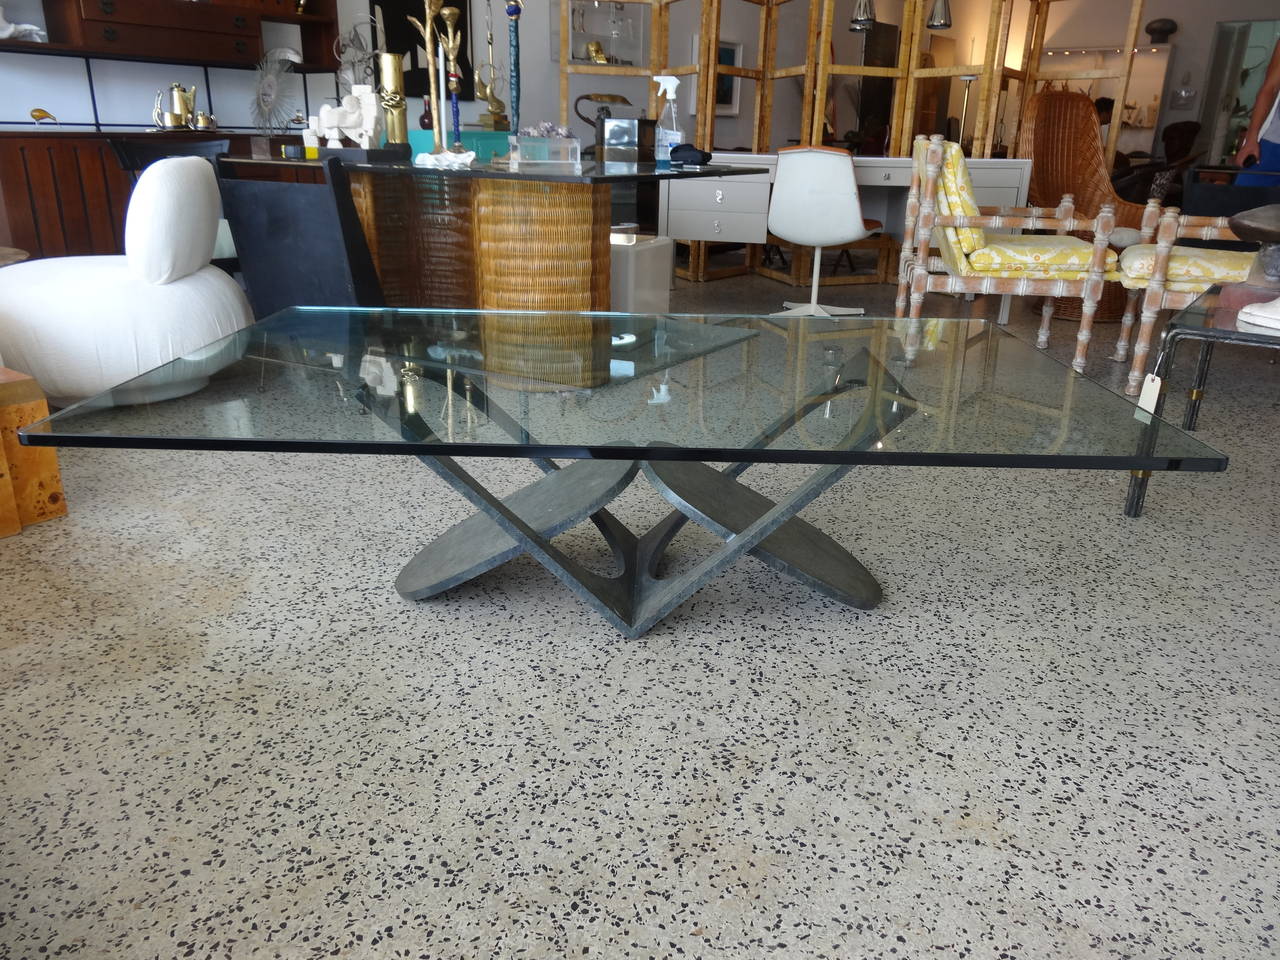 A most unusually formed coffee table of ovals and open rectangles. Love the way the different shapes and open spaces work to form this table. This piece has a geometric/abstract form which is complimented by the bronzed colored finish. Glass has the